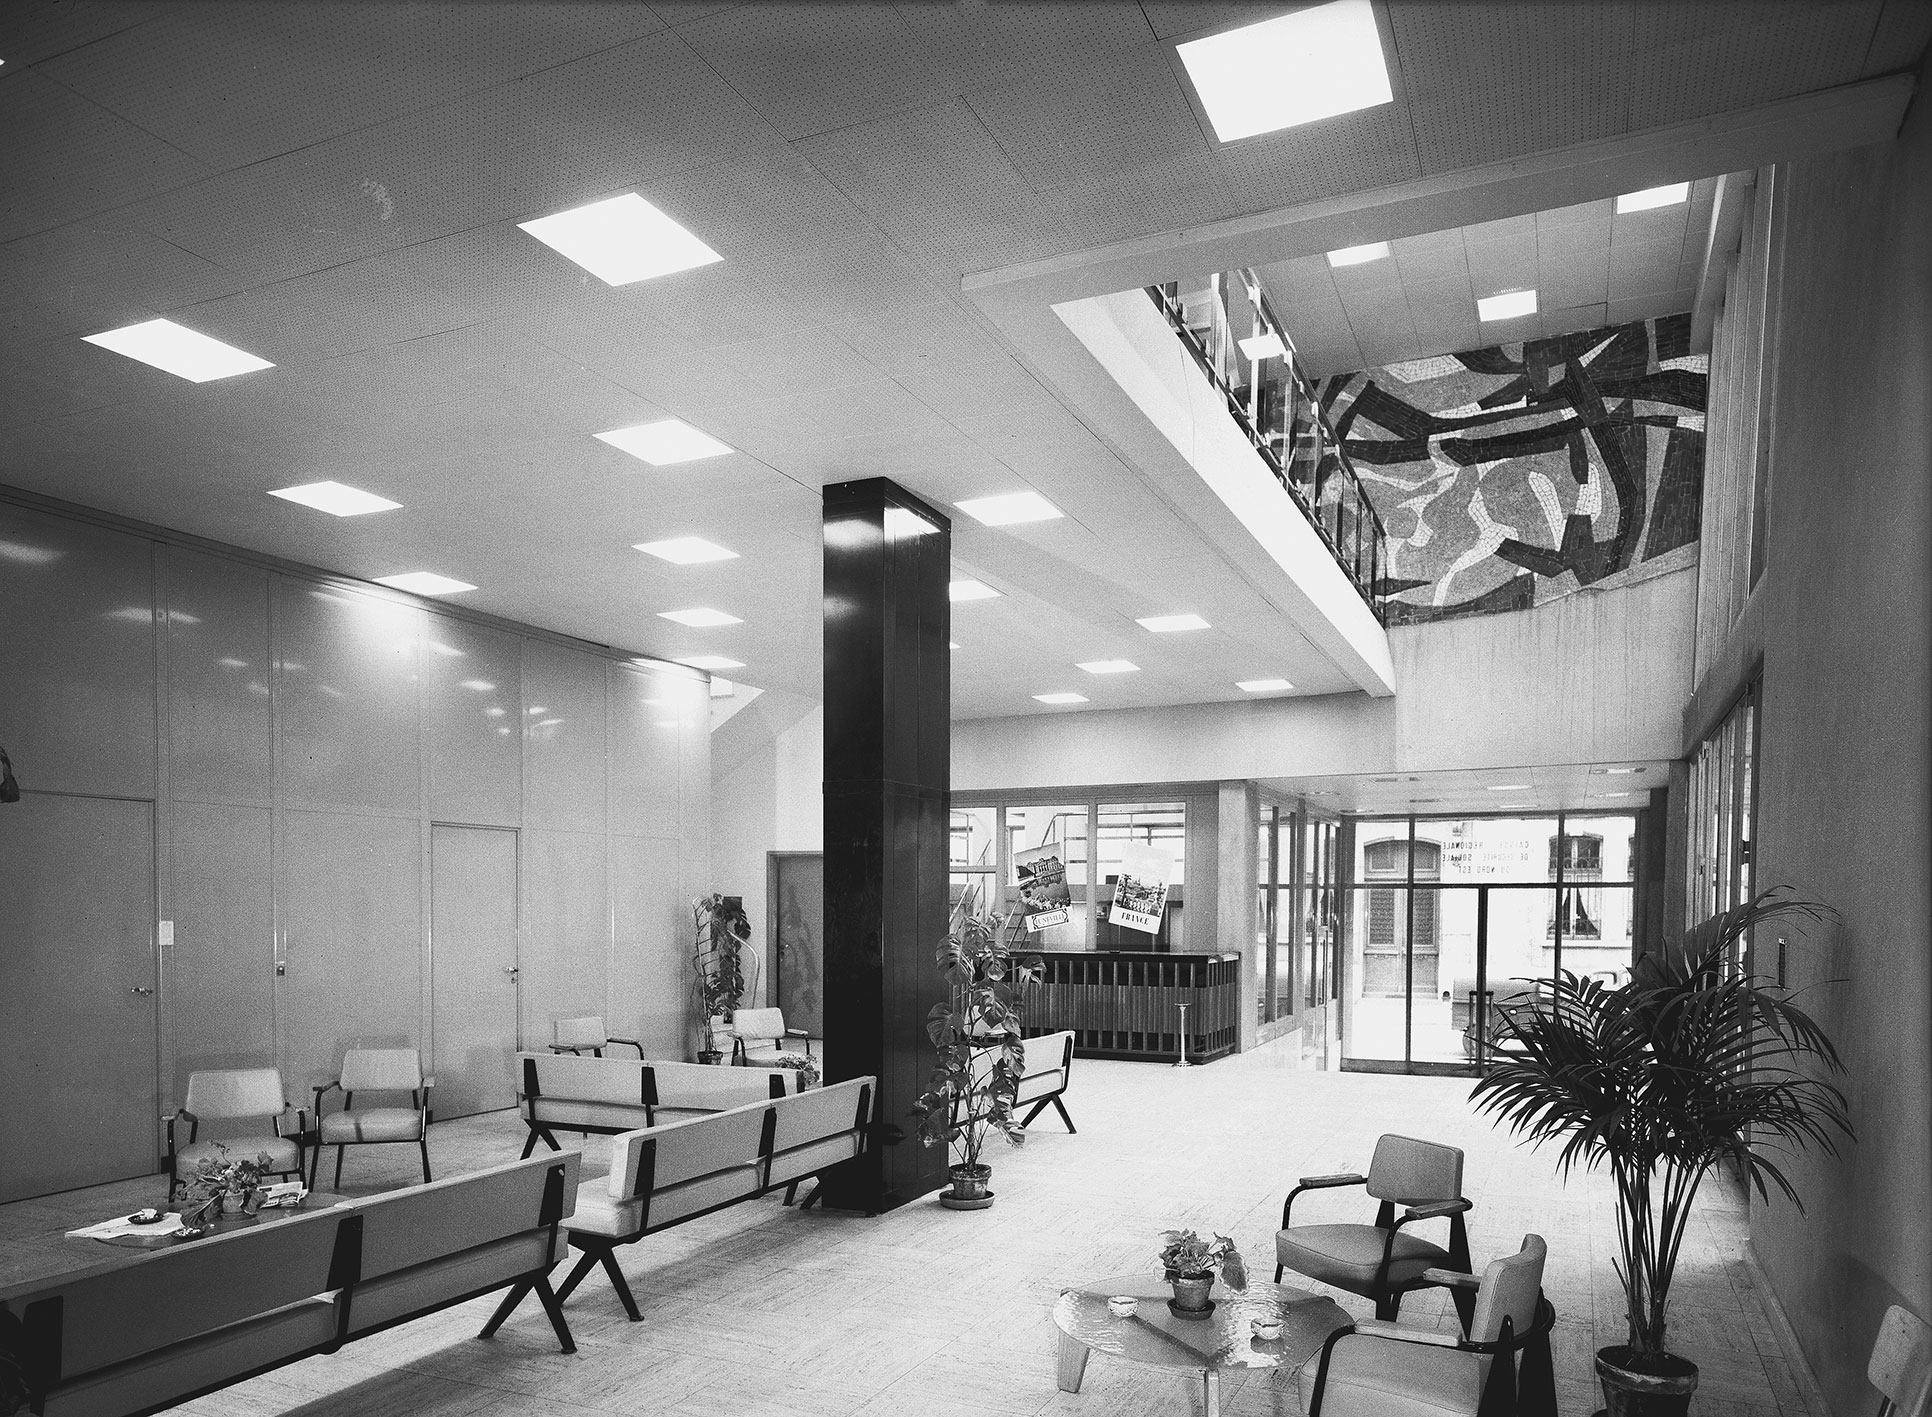 Centre de Réadaptation Fonctionnelle, Nancy (architects R. Lamoise and R. Malot, 1955–1958). Reception hall furnished with Marcoule type benches.